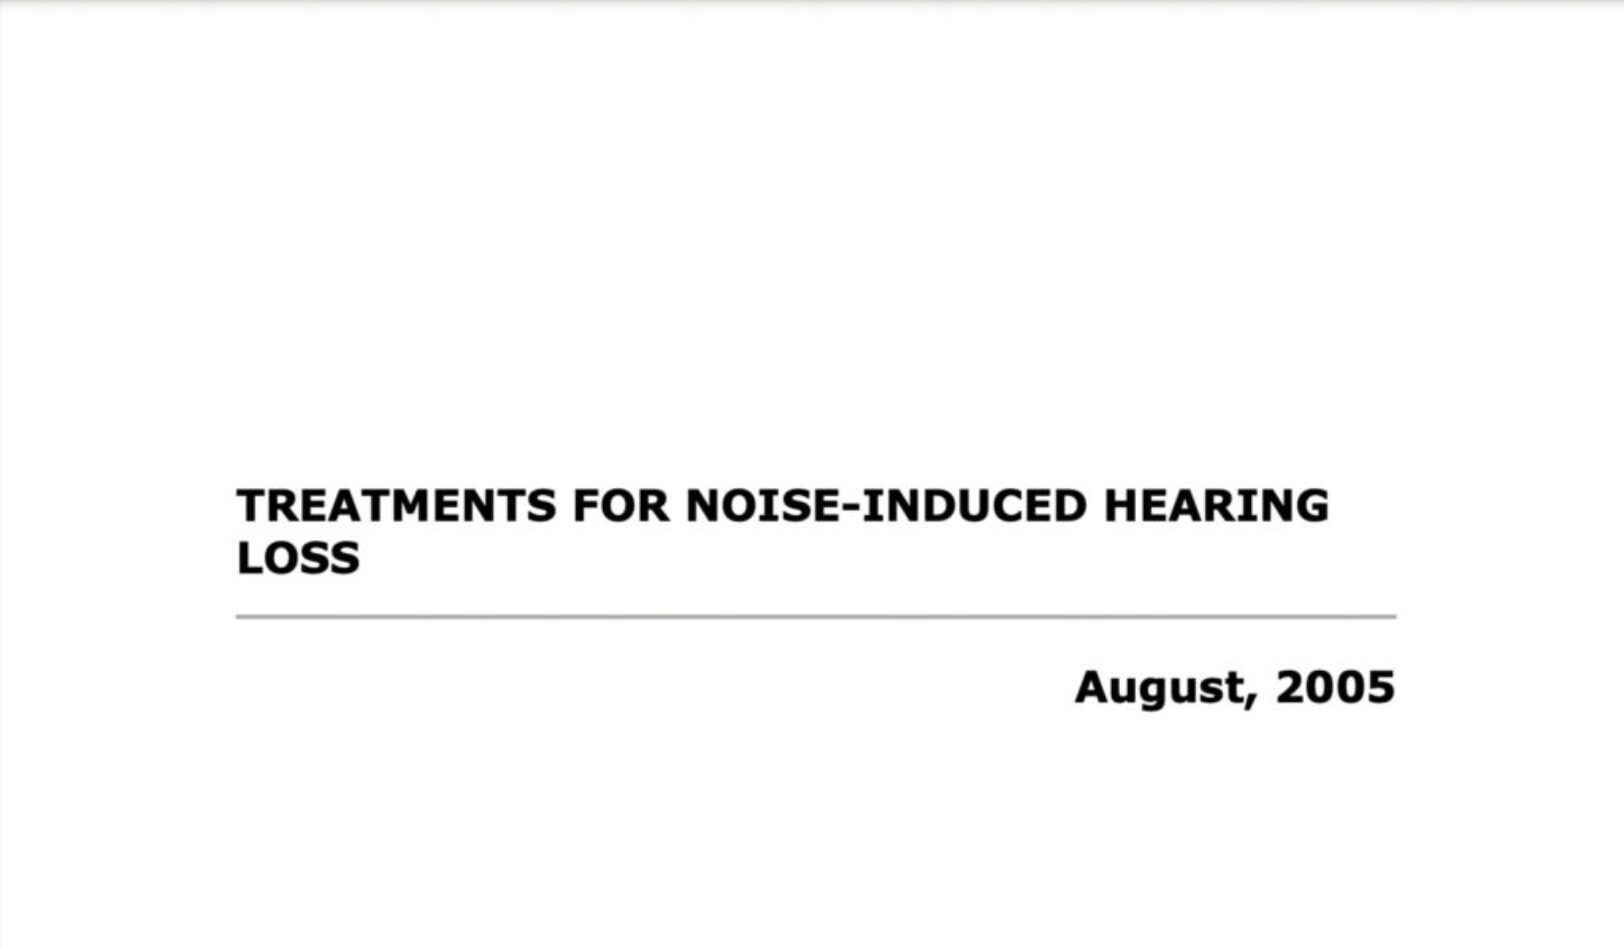 Treatments for Noise-Induced Hearing Loss (NIHL) Report